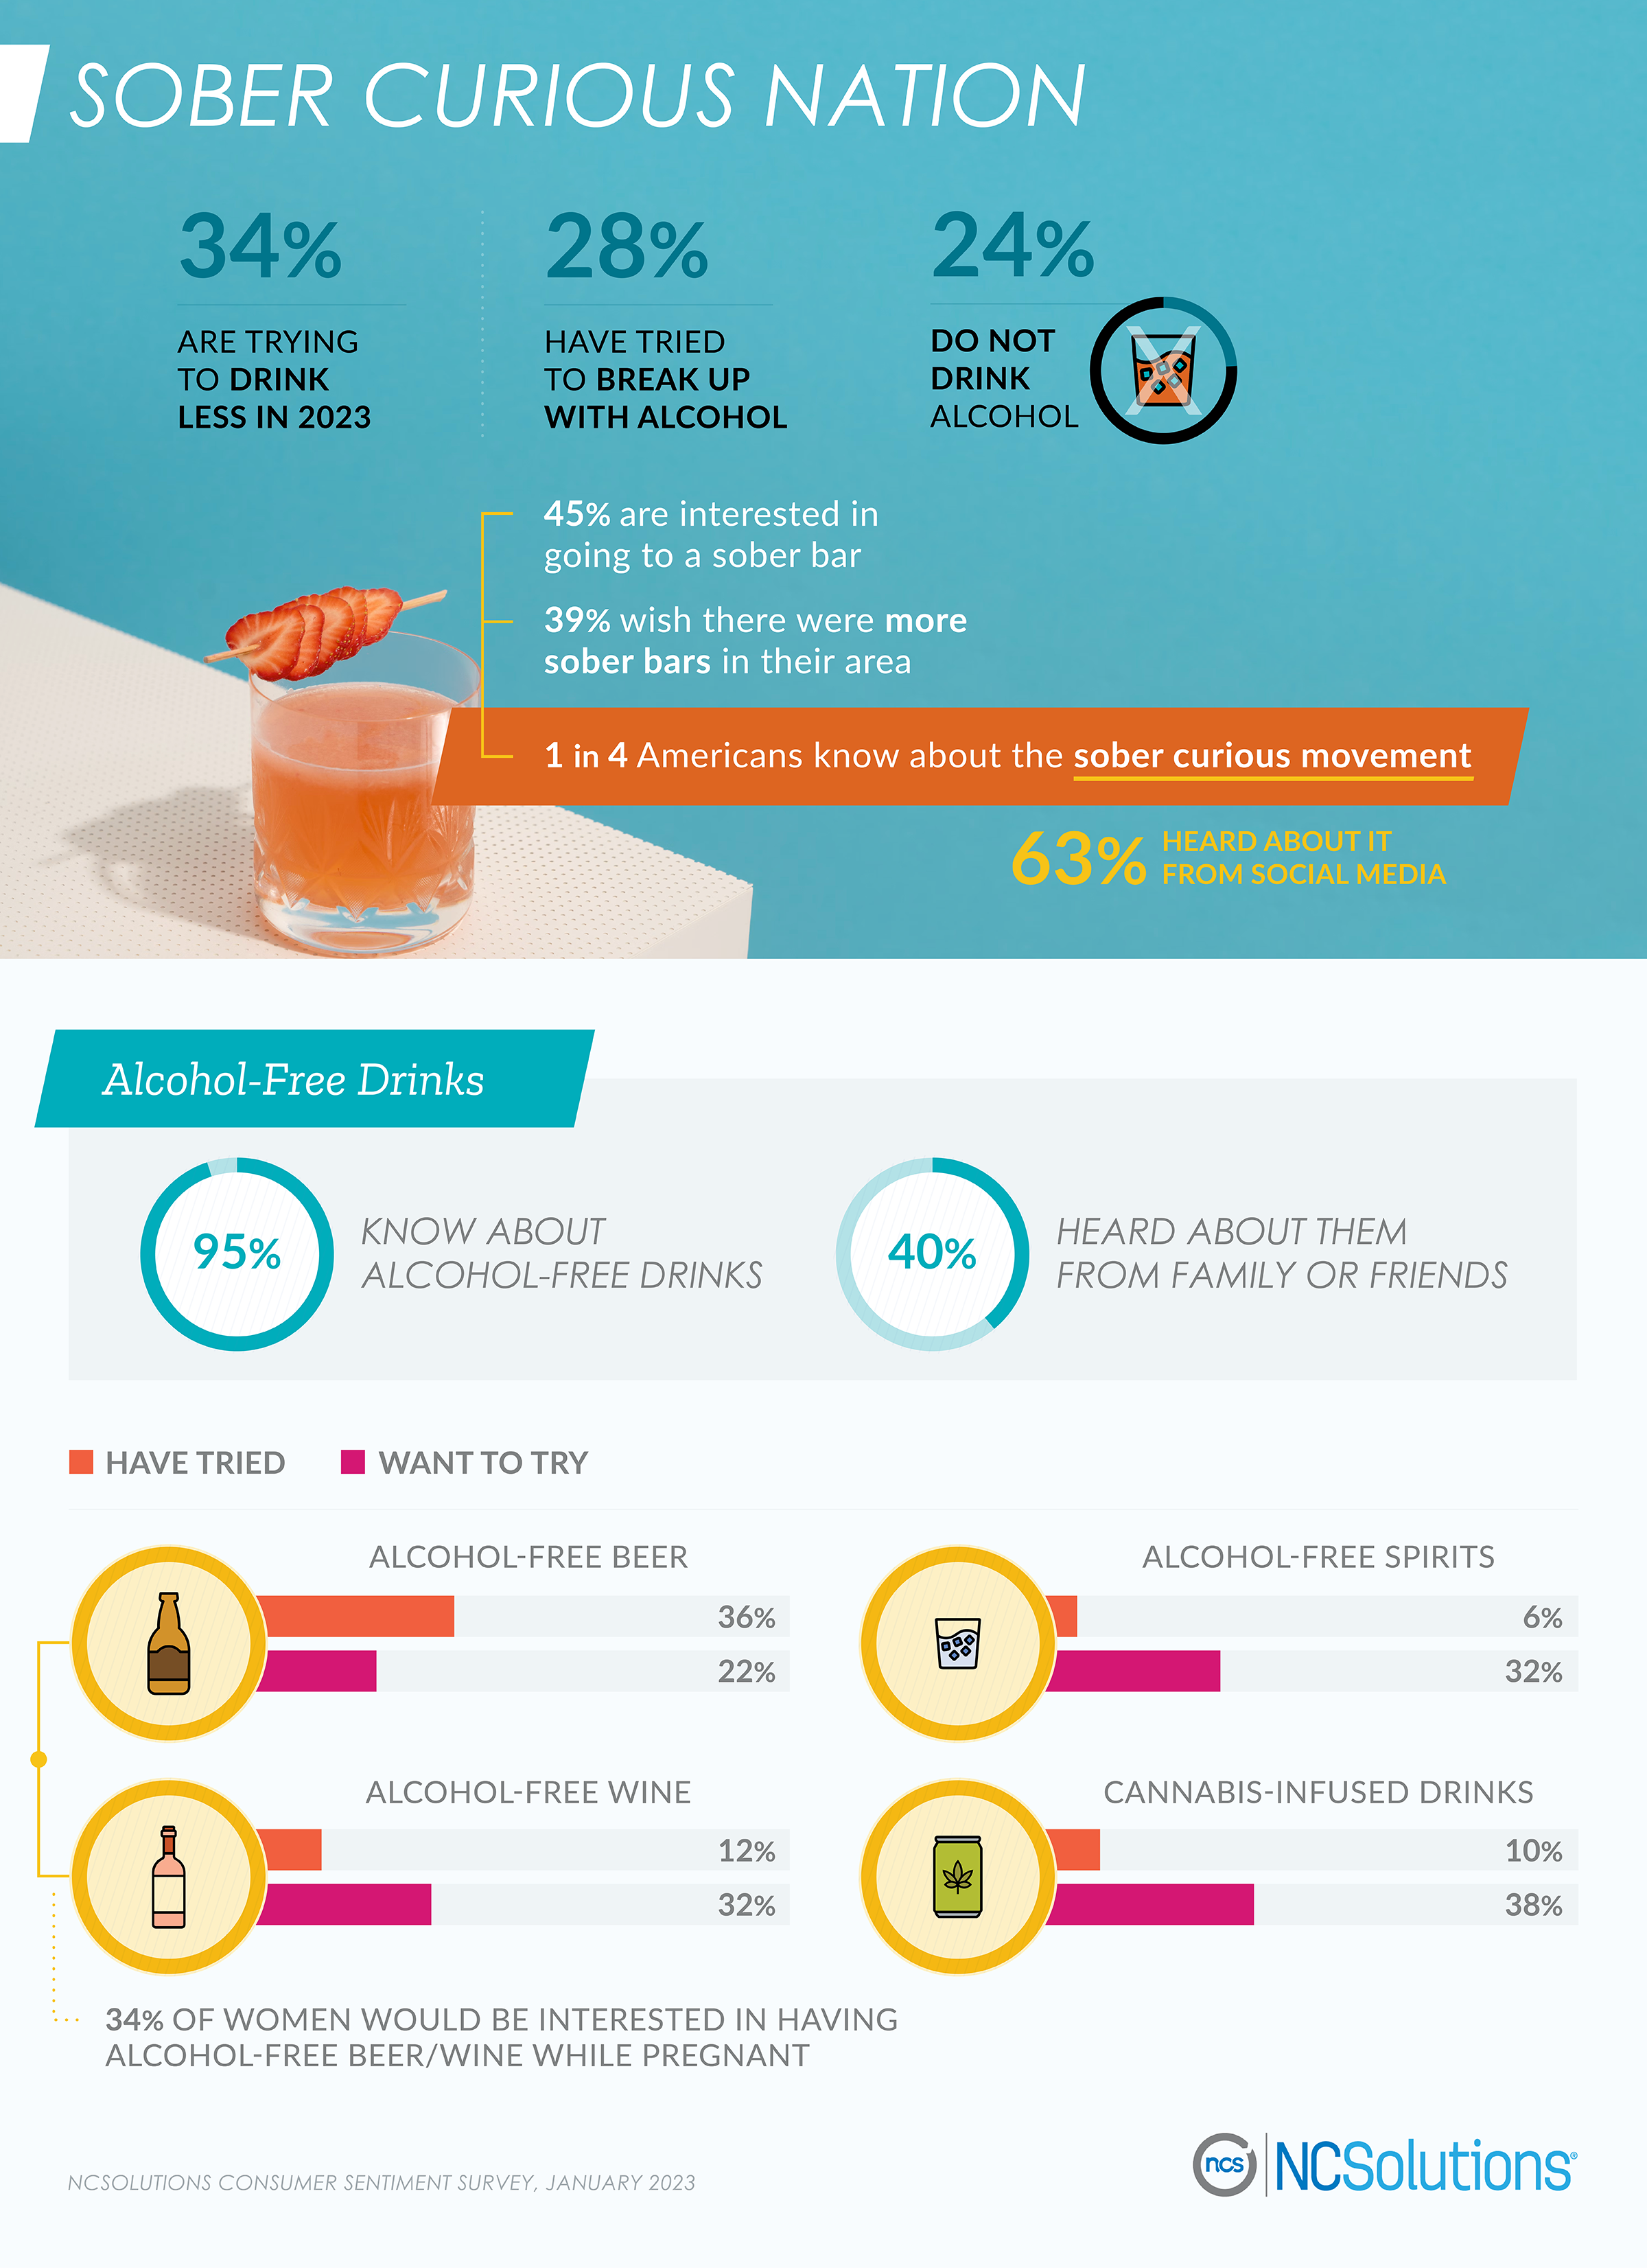 America’s drinking habits and interest in becoming sober curious - survey from ncsolutions.com